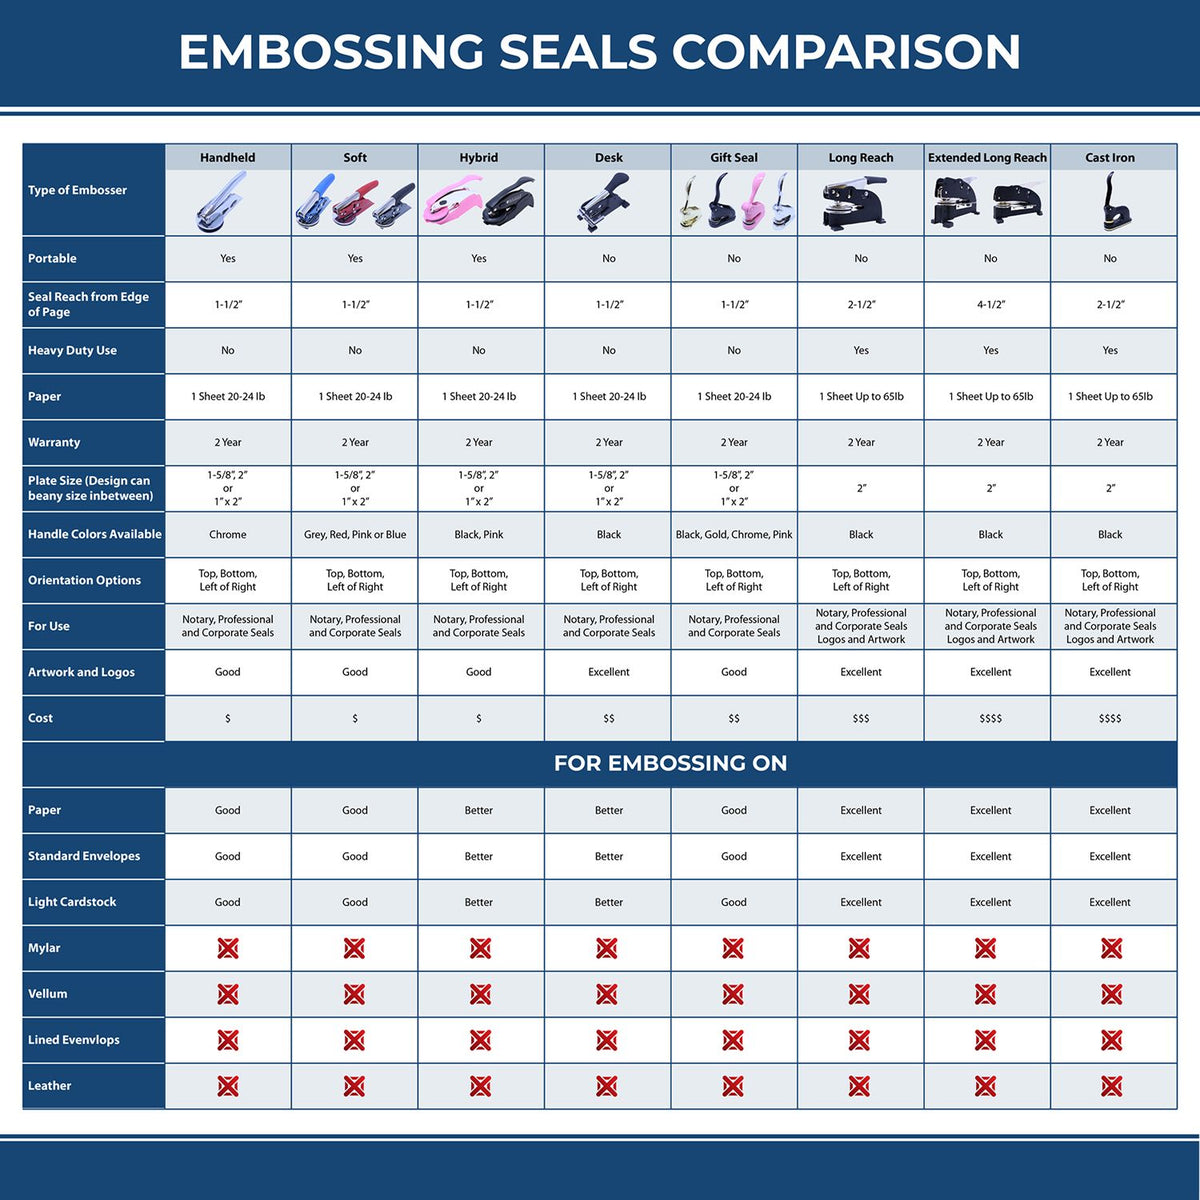 A comparison chart for the different types of mount models available for the Extended Long Reach Nevada Architect Seal Embosser.